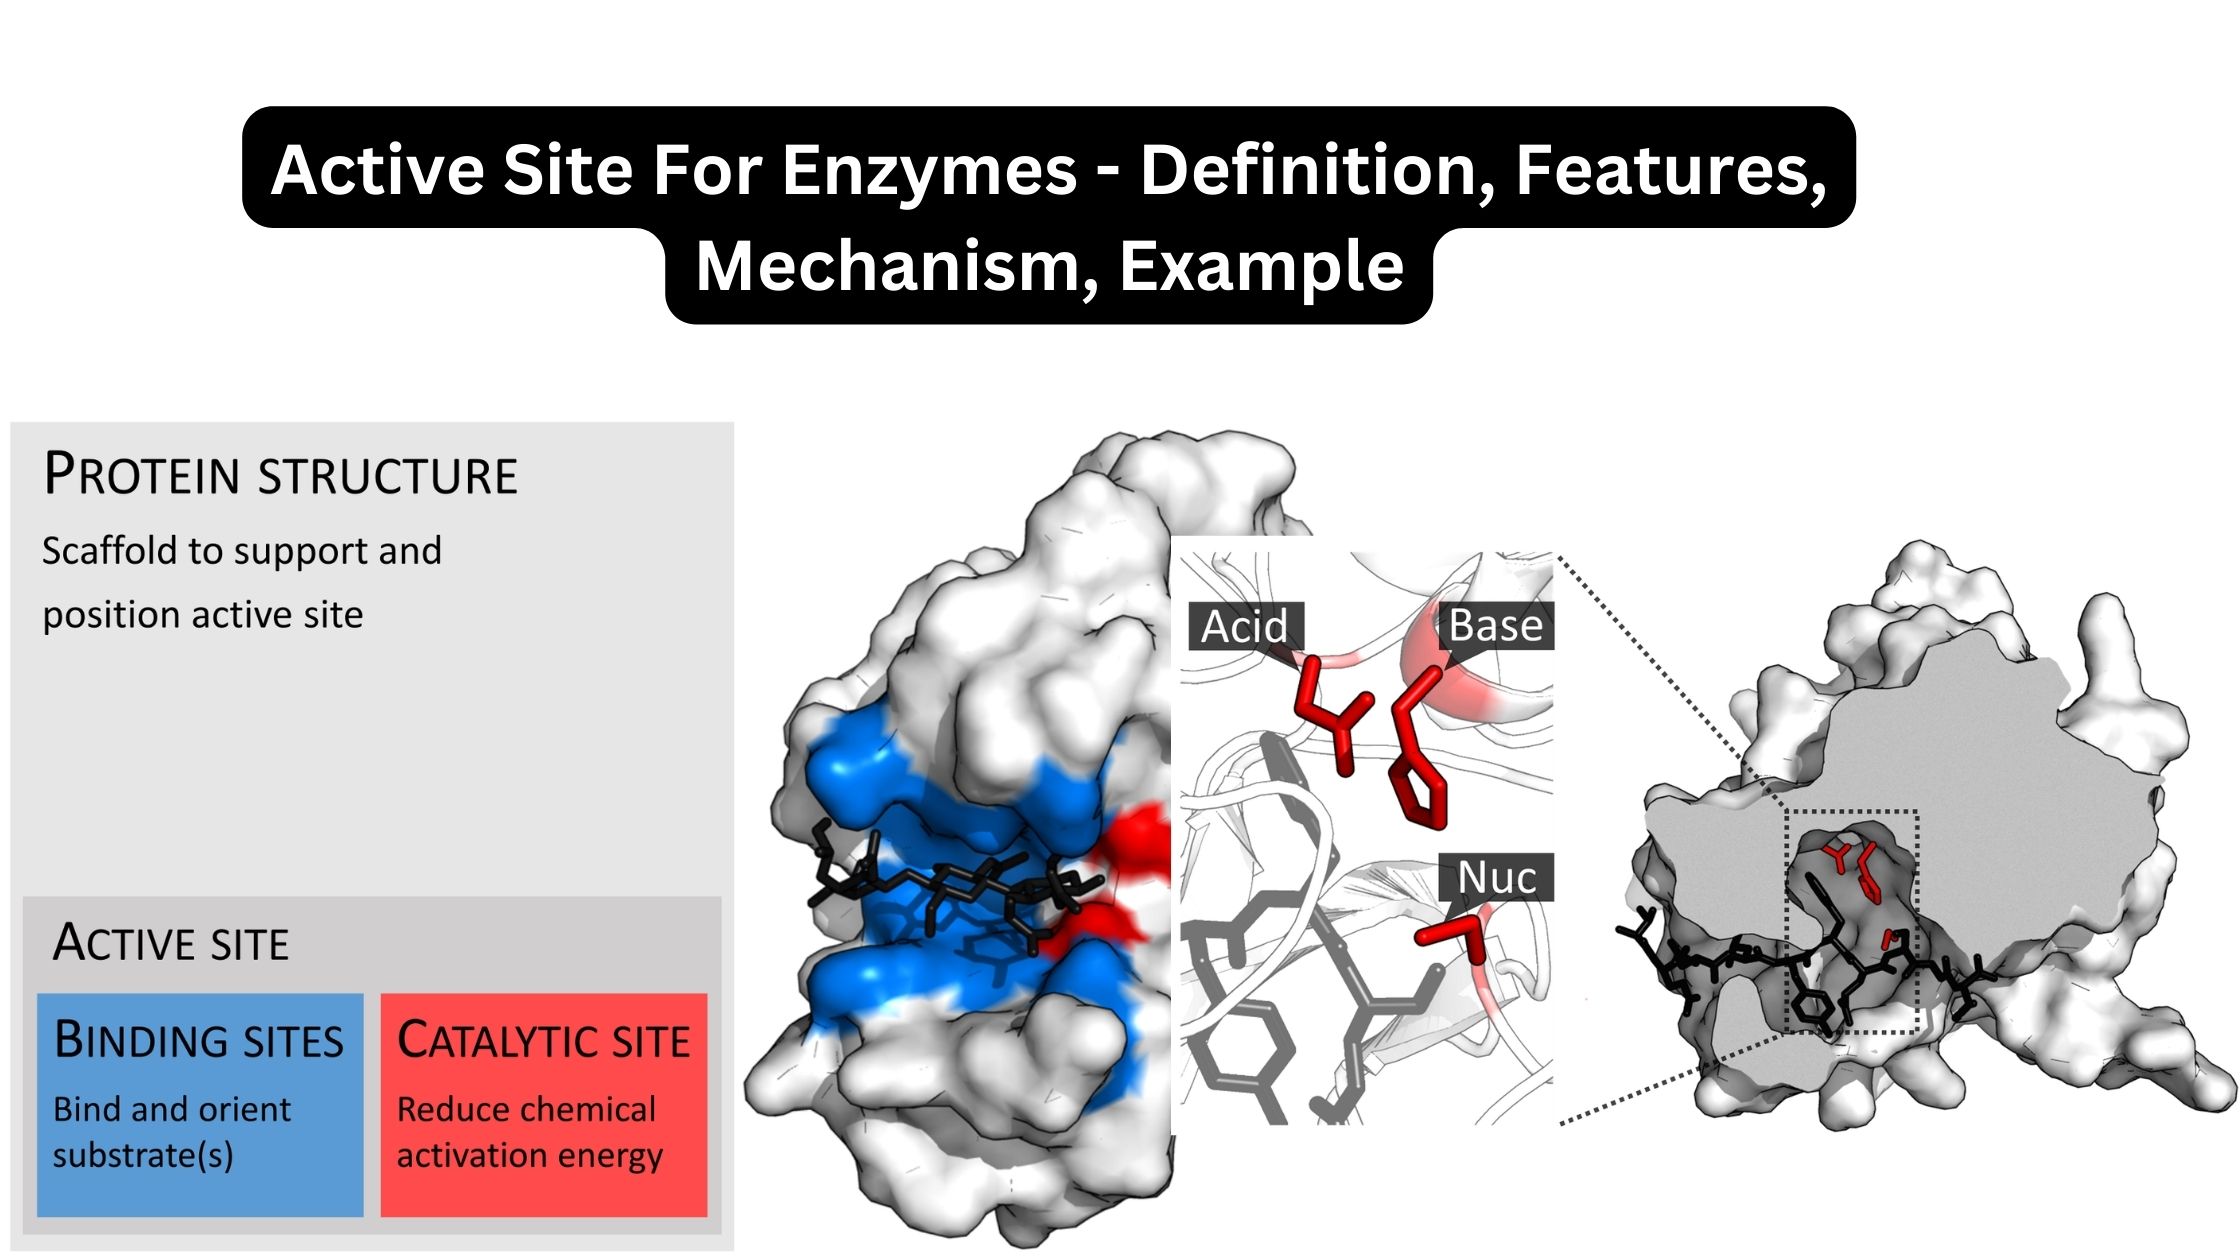 Active Site For Enzymes - Definition, Features, Mechanism, Example